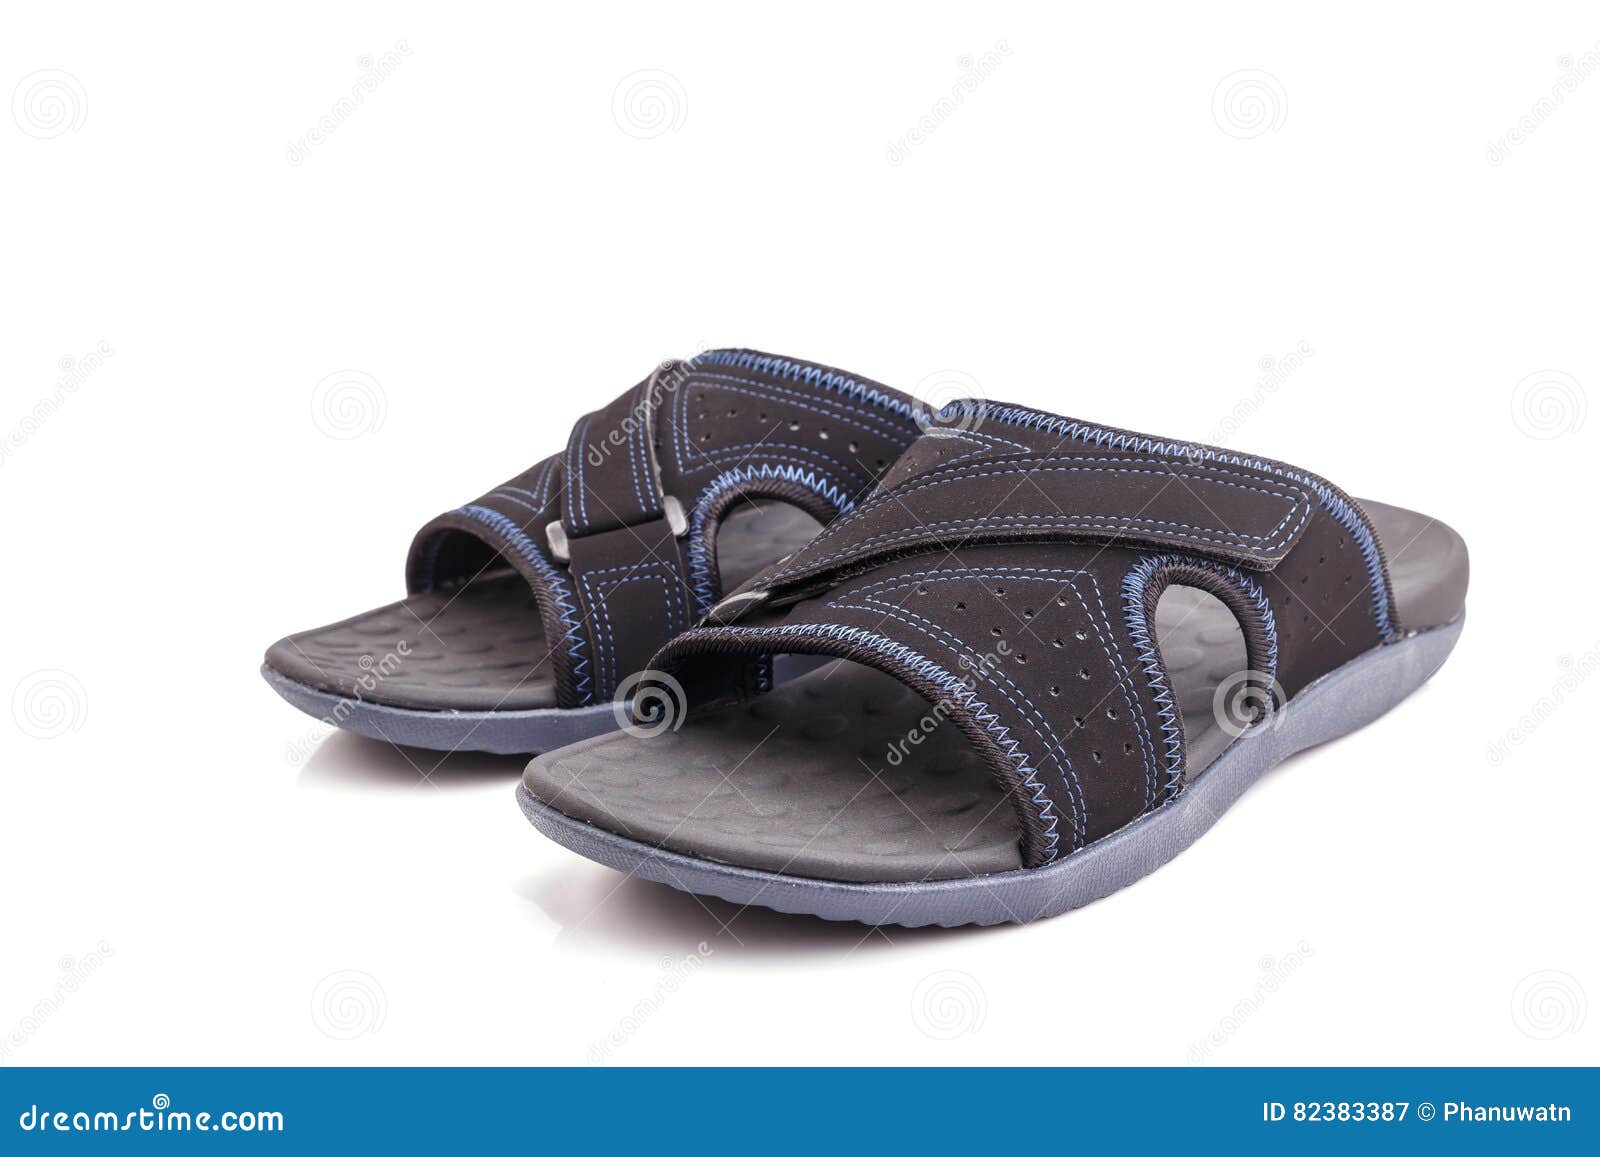 New Black Men S Sandals Isolated on White Stock Image - Image of right ...